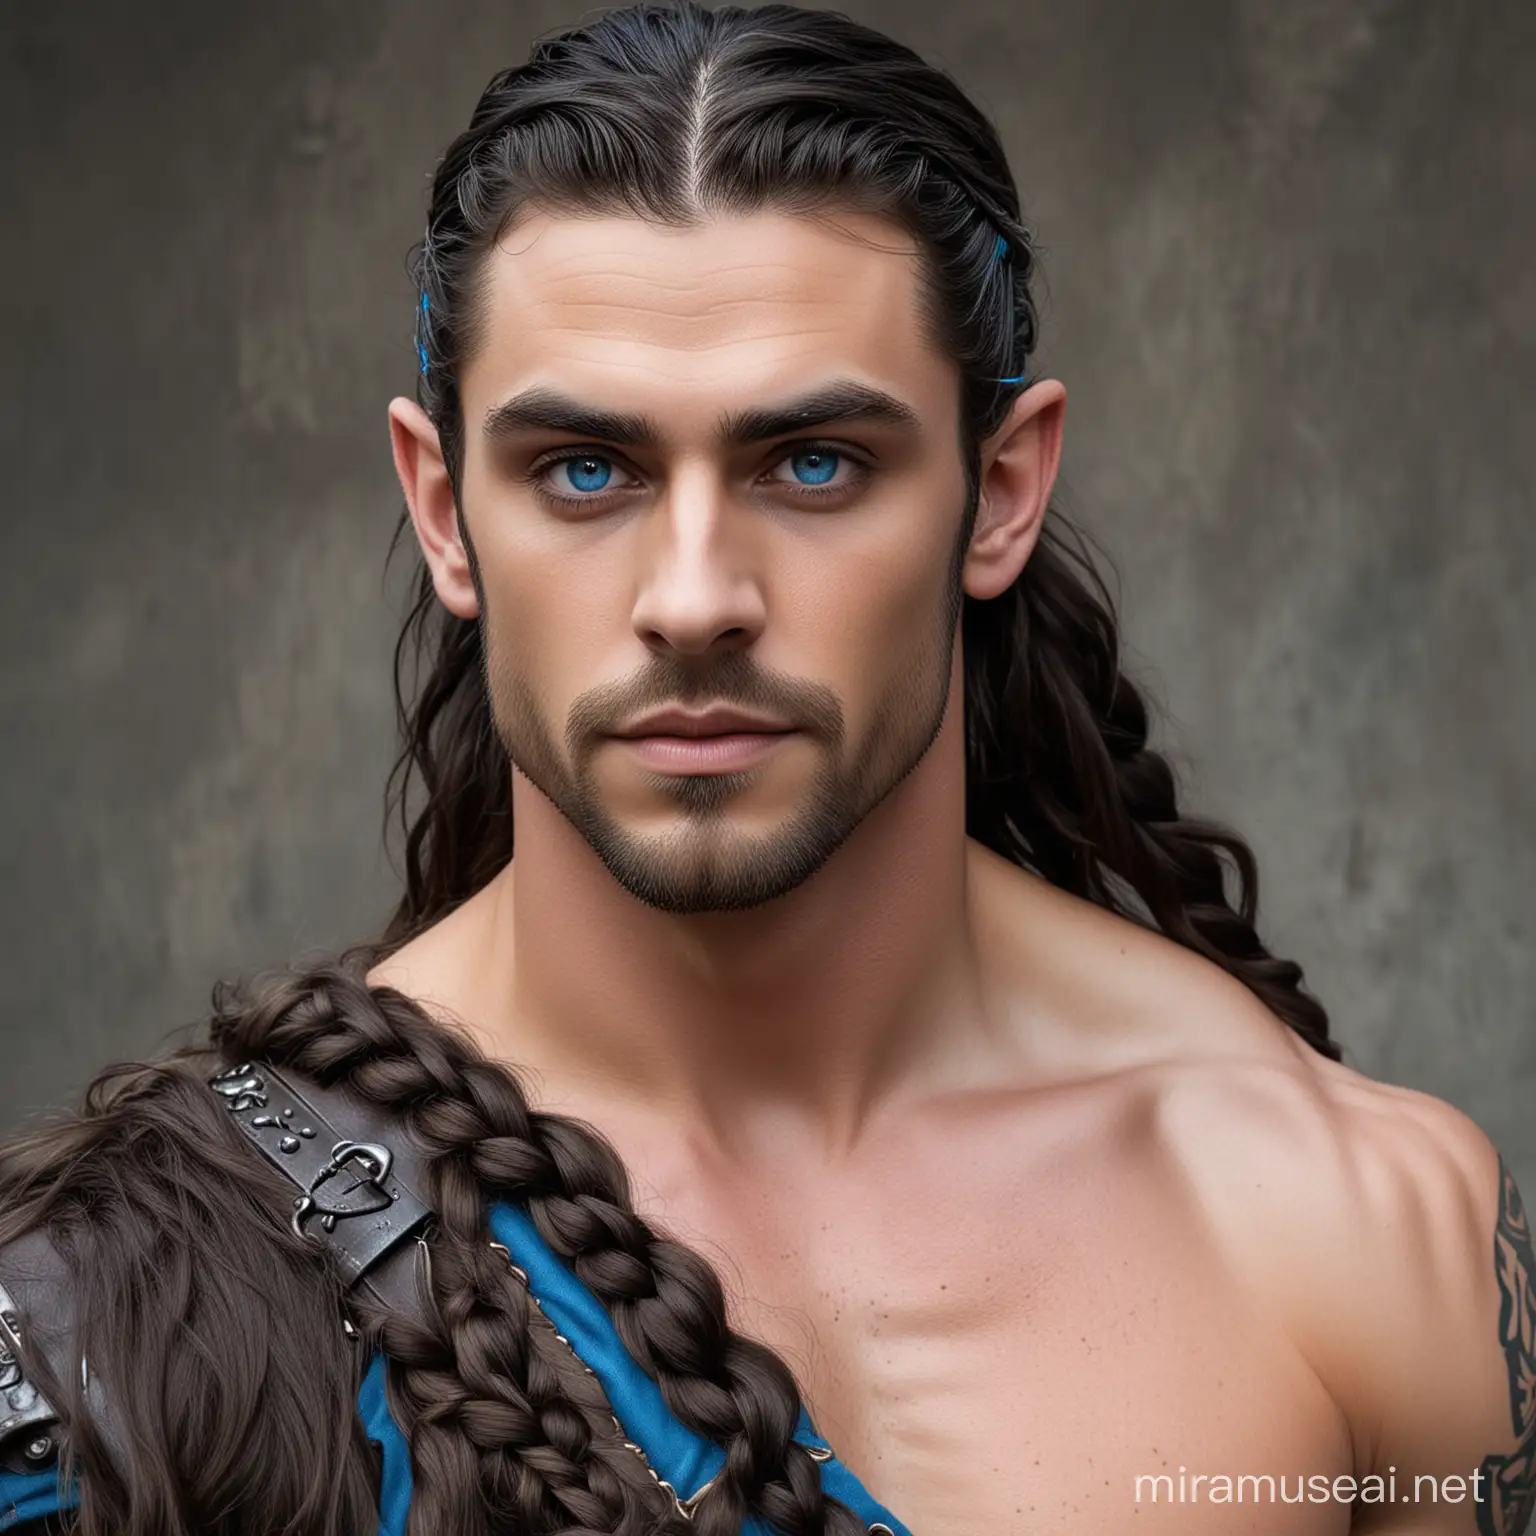 Muscular dark haired male elf with long hair French 
braided to hang over one shoulder, a close cut beard and large bright blue eyes